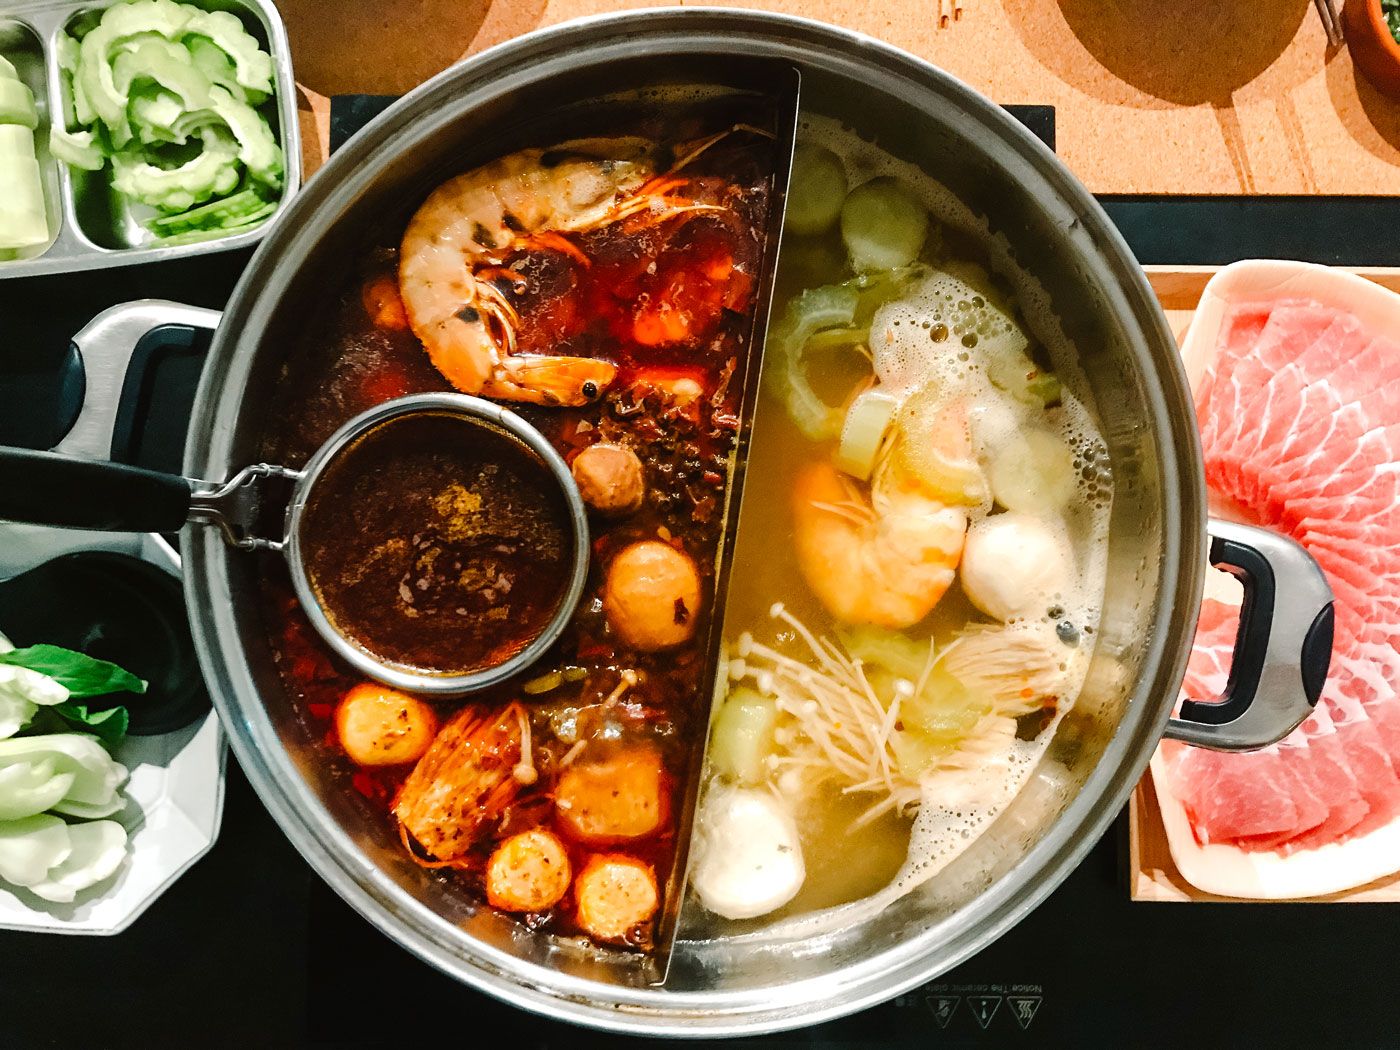 A steamboat, or hotpot, resting on a table with various raw ingredients.